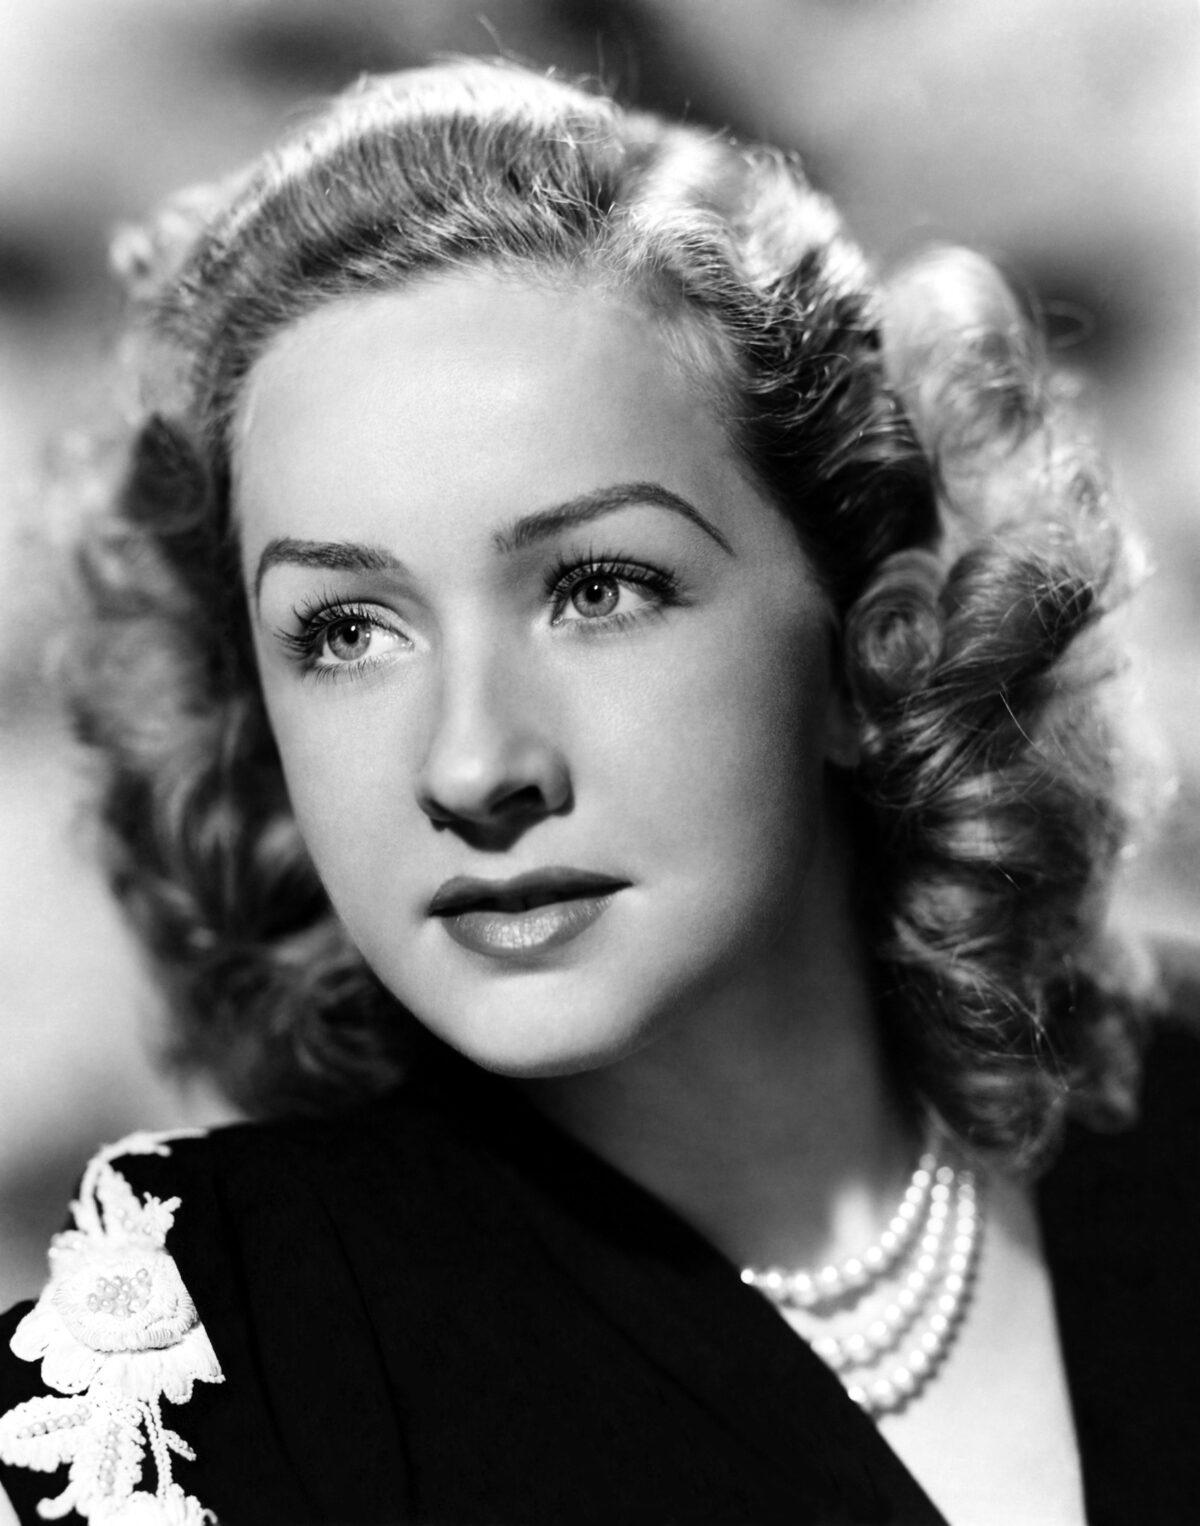 Promotional photograph of actor Bonita Granville in the 1940s. (Public Domain)